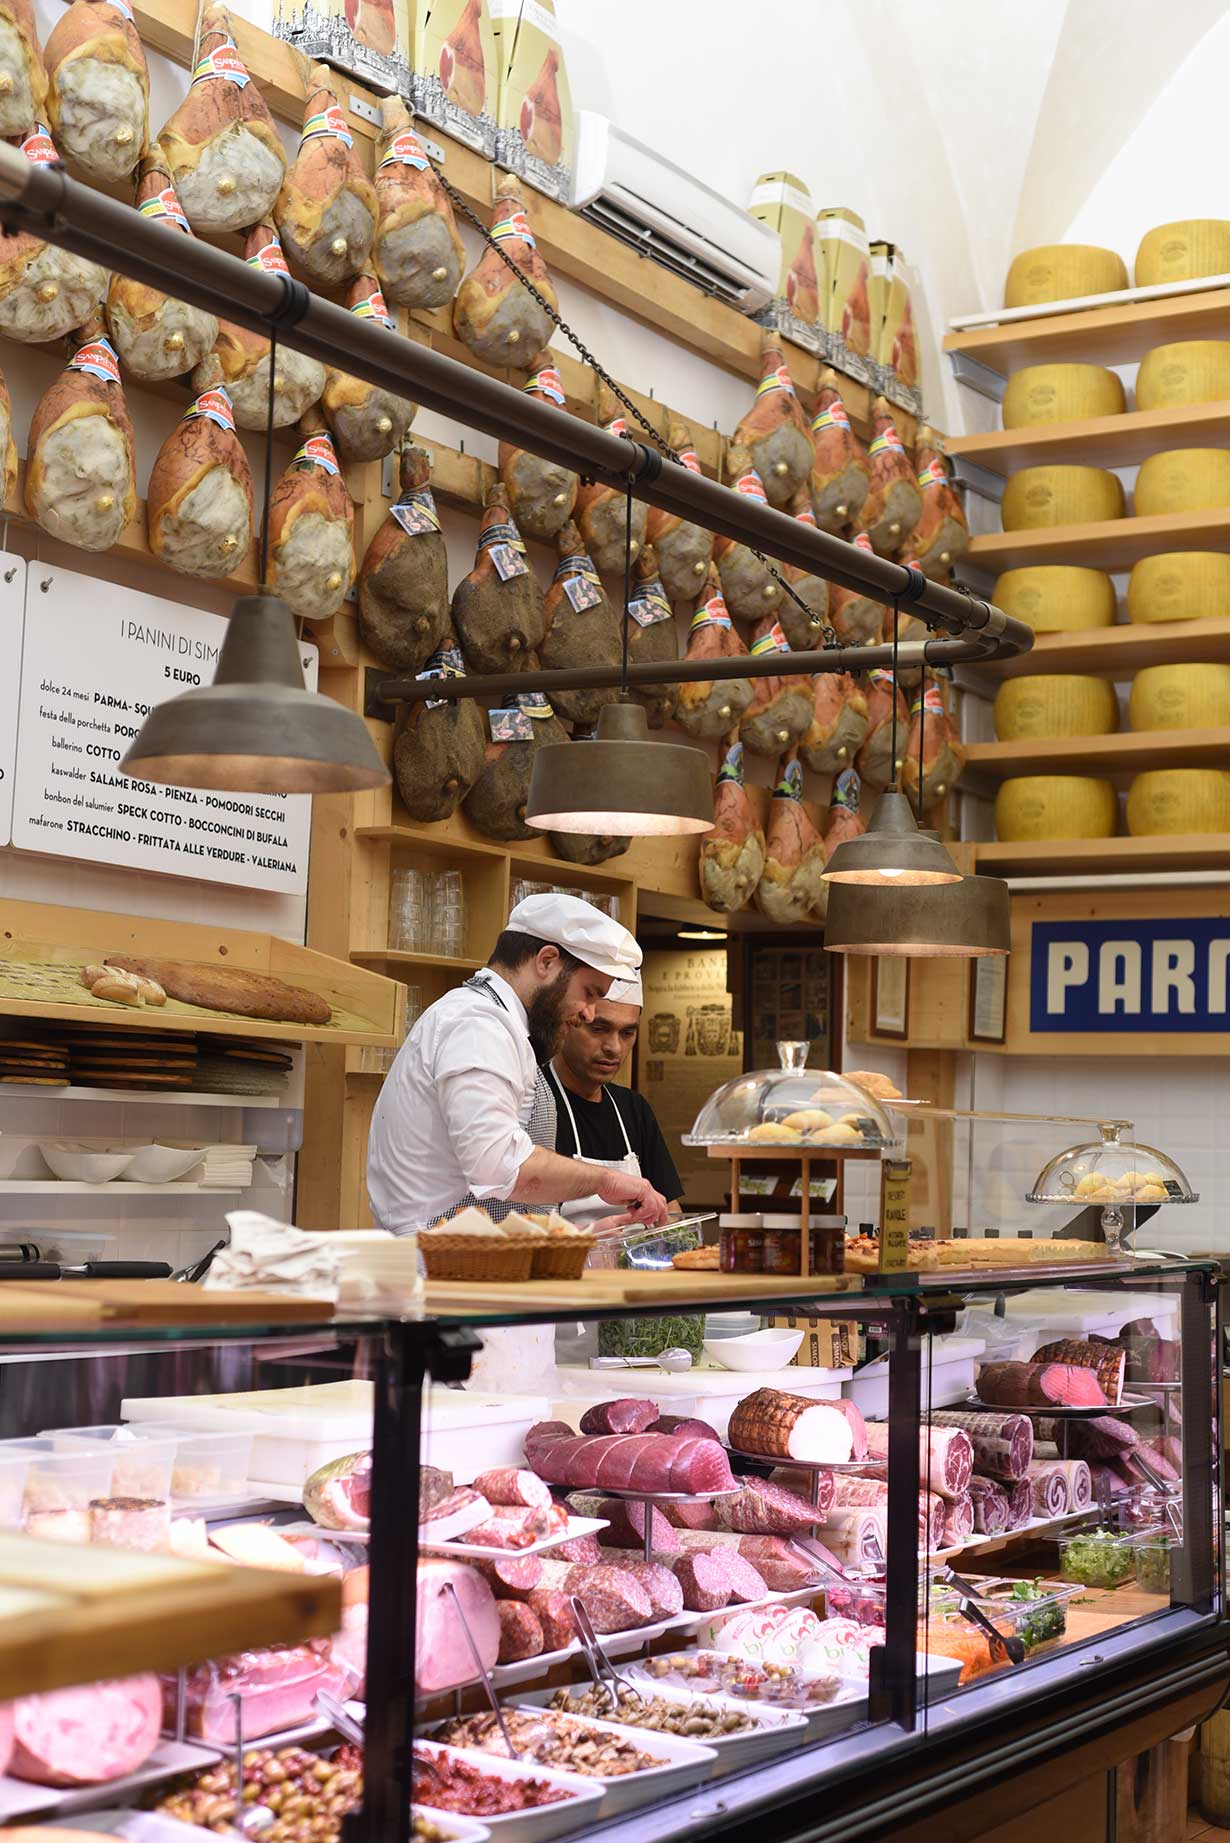 11 Things To Eat and Drink in Emilia Romagna